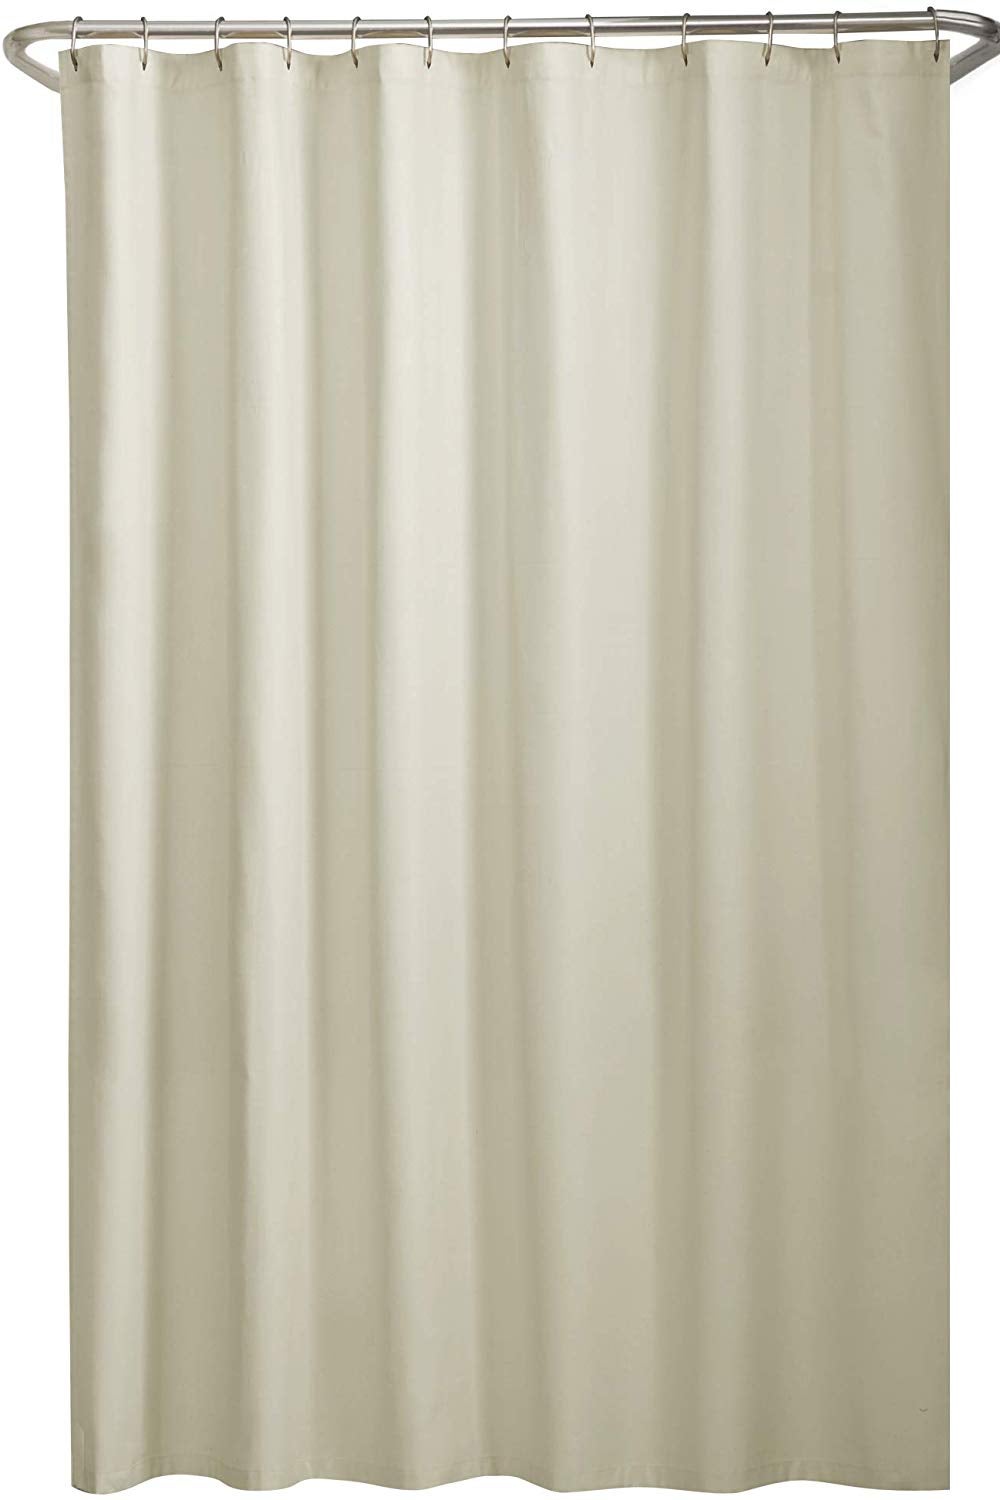 Maytex Water Repellent Fabric Shower Curtain or Liner